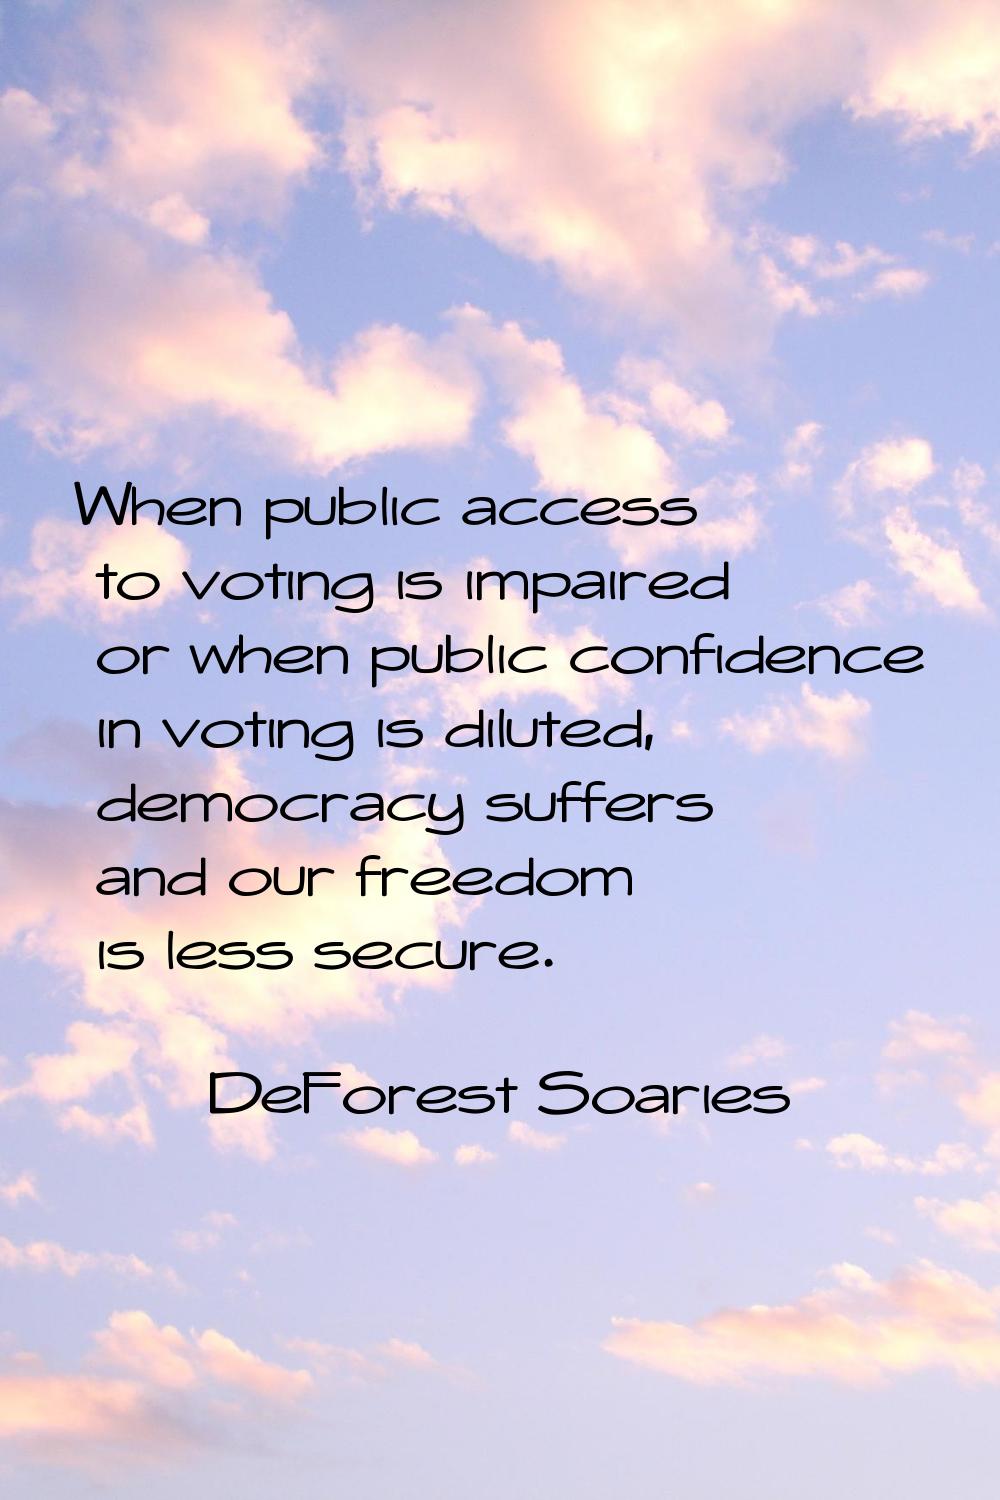 When public access to voting is impaired or when public confidence in voting is diluted, democracy 